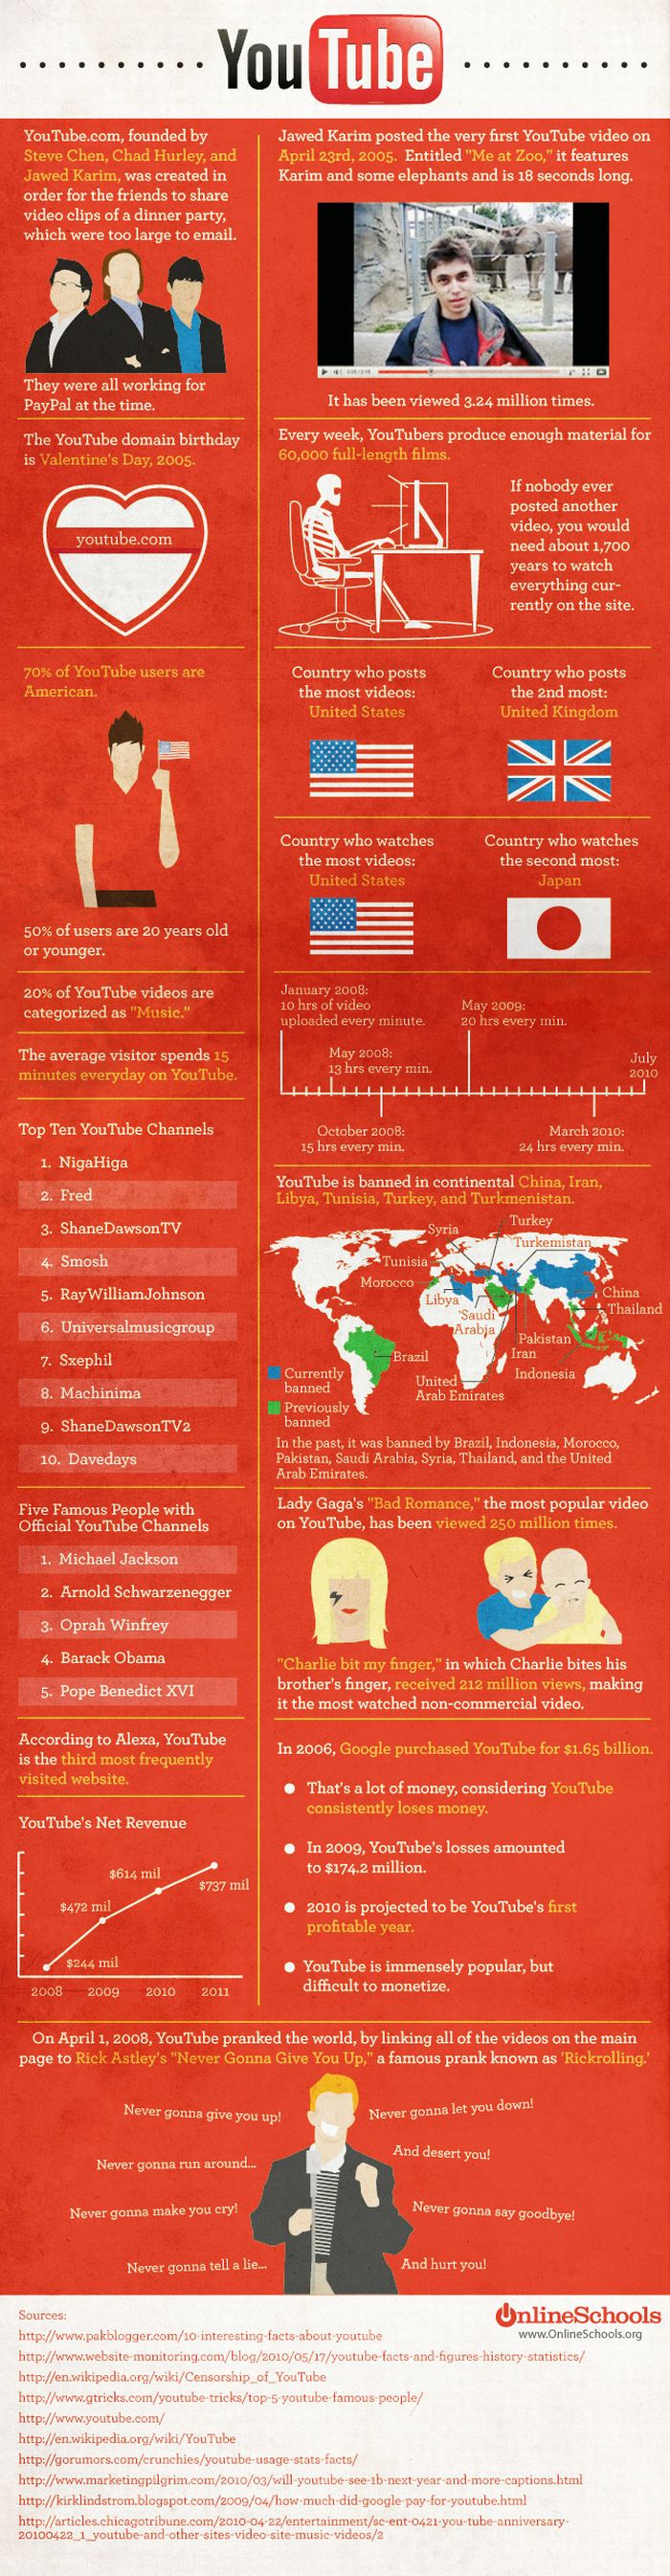 Facts About Youtube (Infographic)